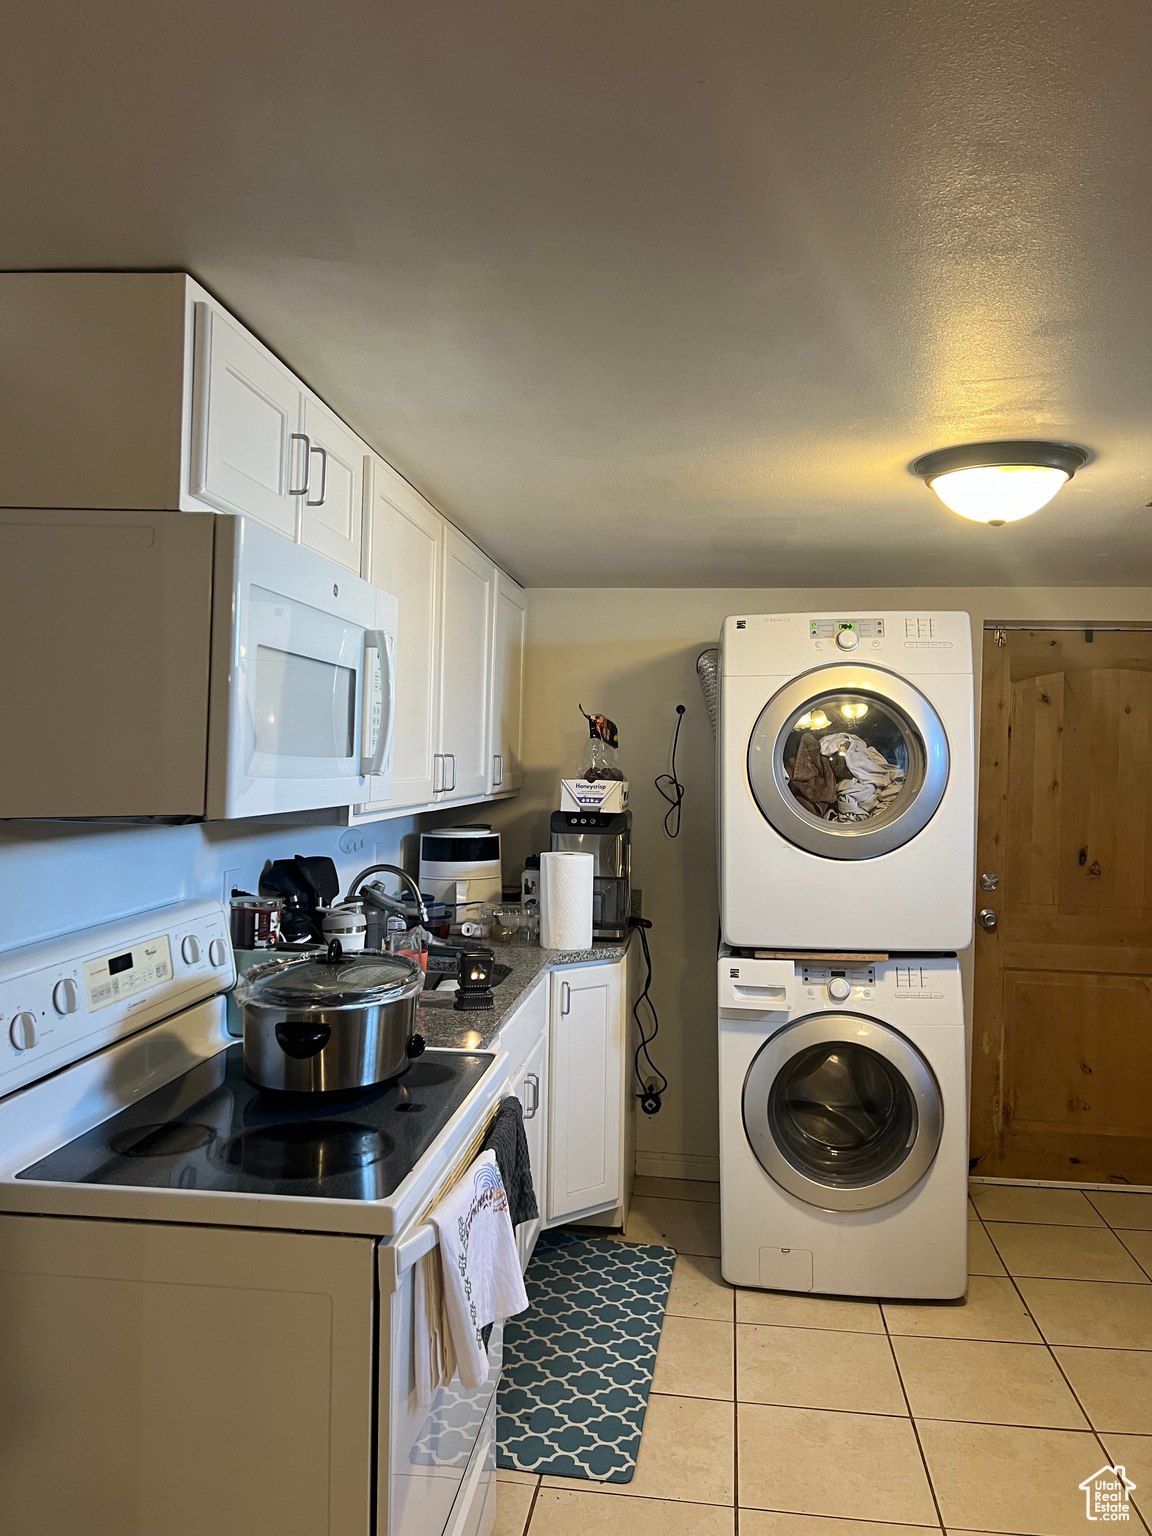 Kitchen featuring white cabinets, light tile flooring, stacked washer and clothes dryer, and electric range